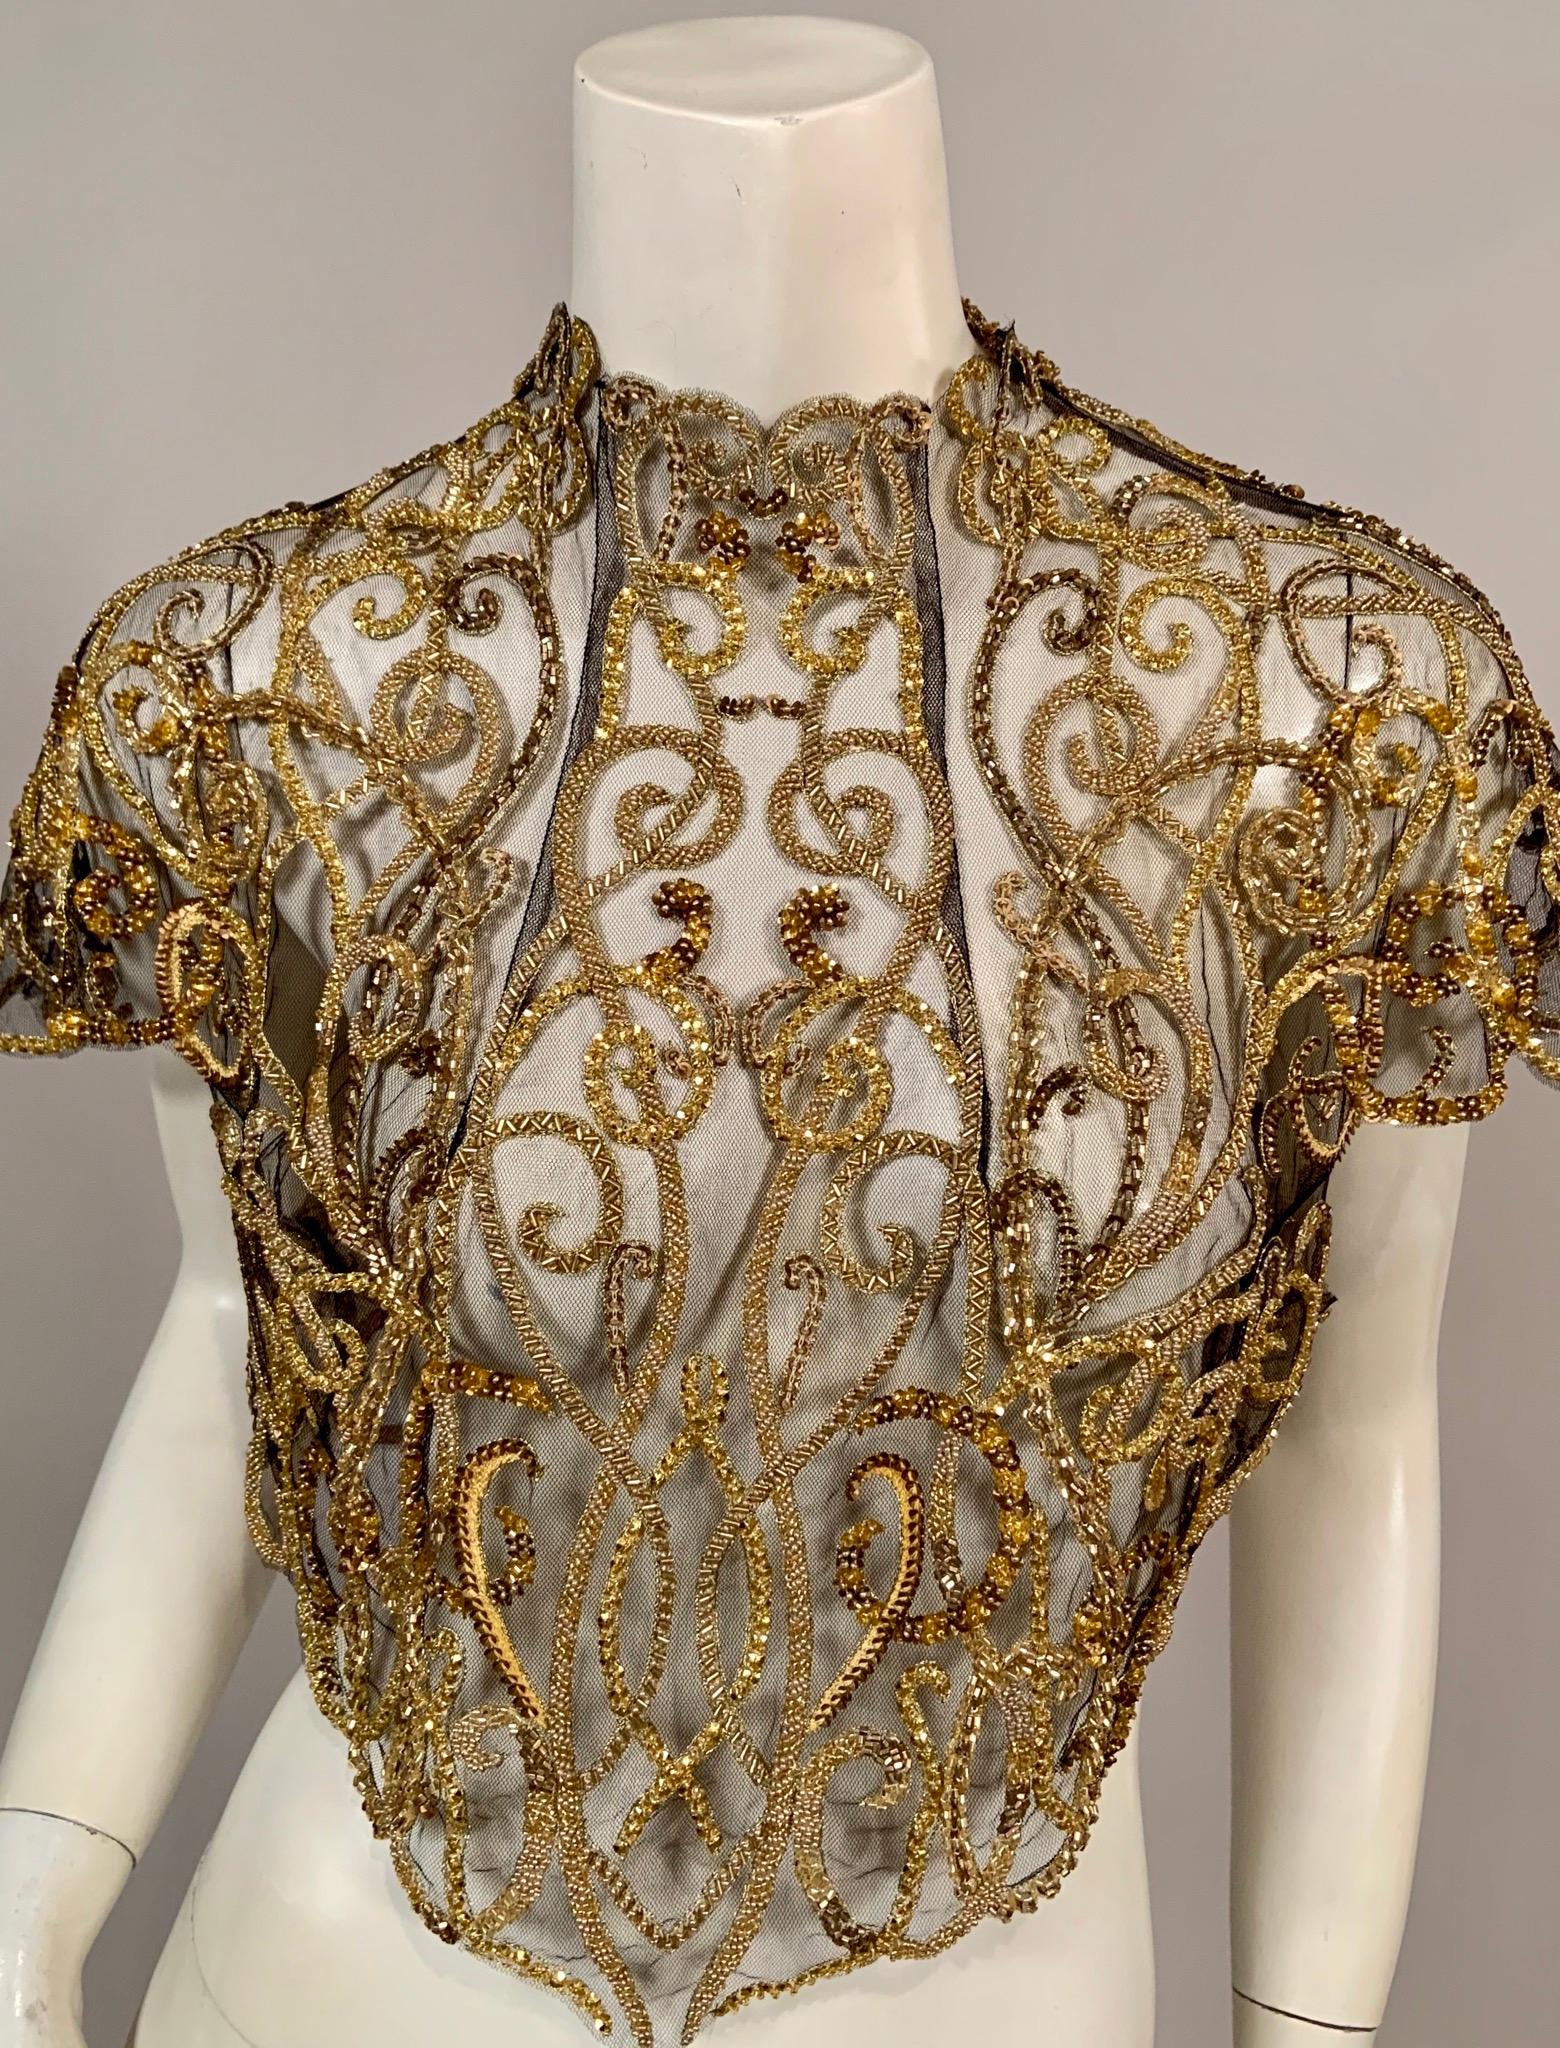 Every type of gold bead or sequin imaginable is used to great advantage on this sheer black tulle bodice or blouse. The design is reminiscent of the beautiful scrolling iron work that one would see in Paris. It is edged with the most delicate gold